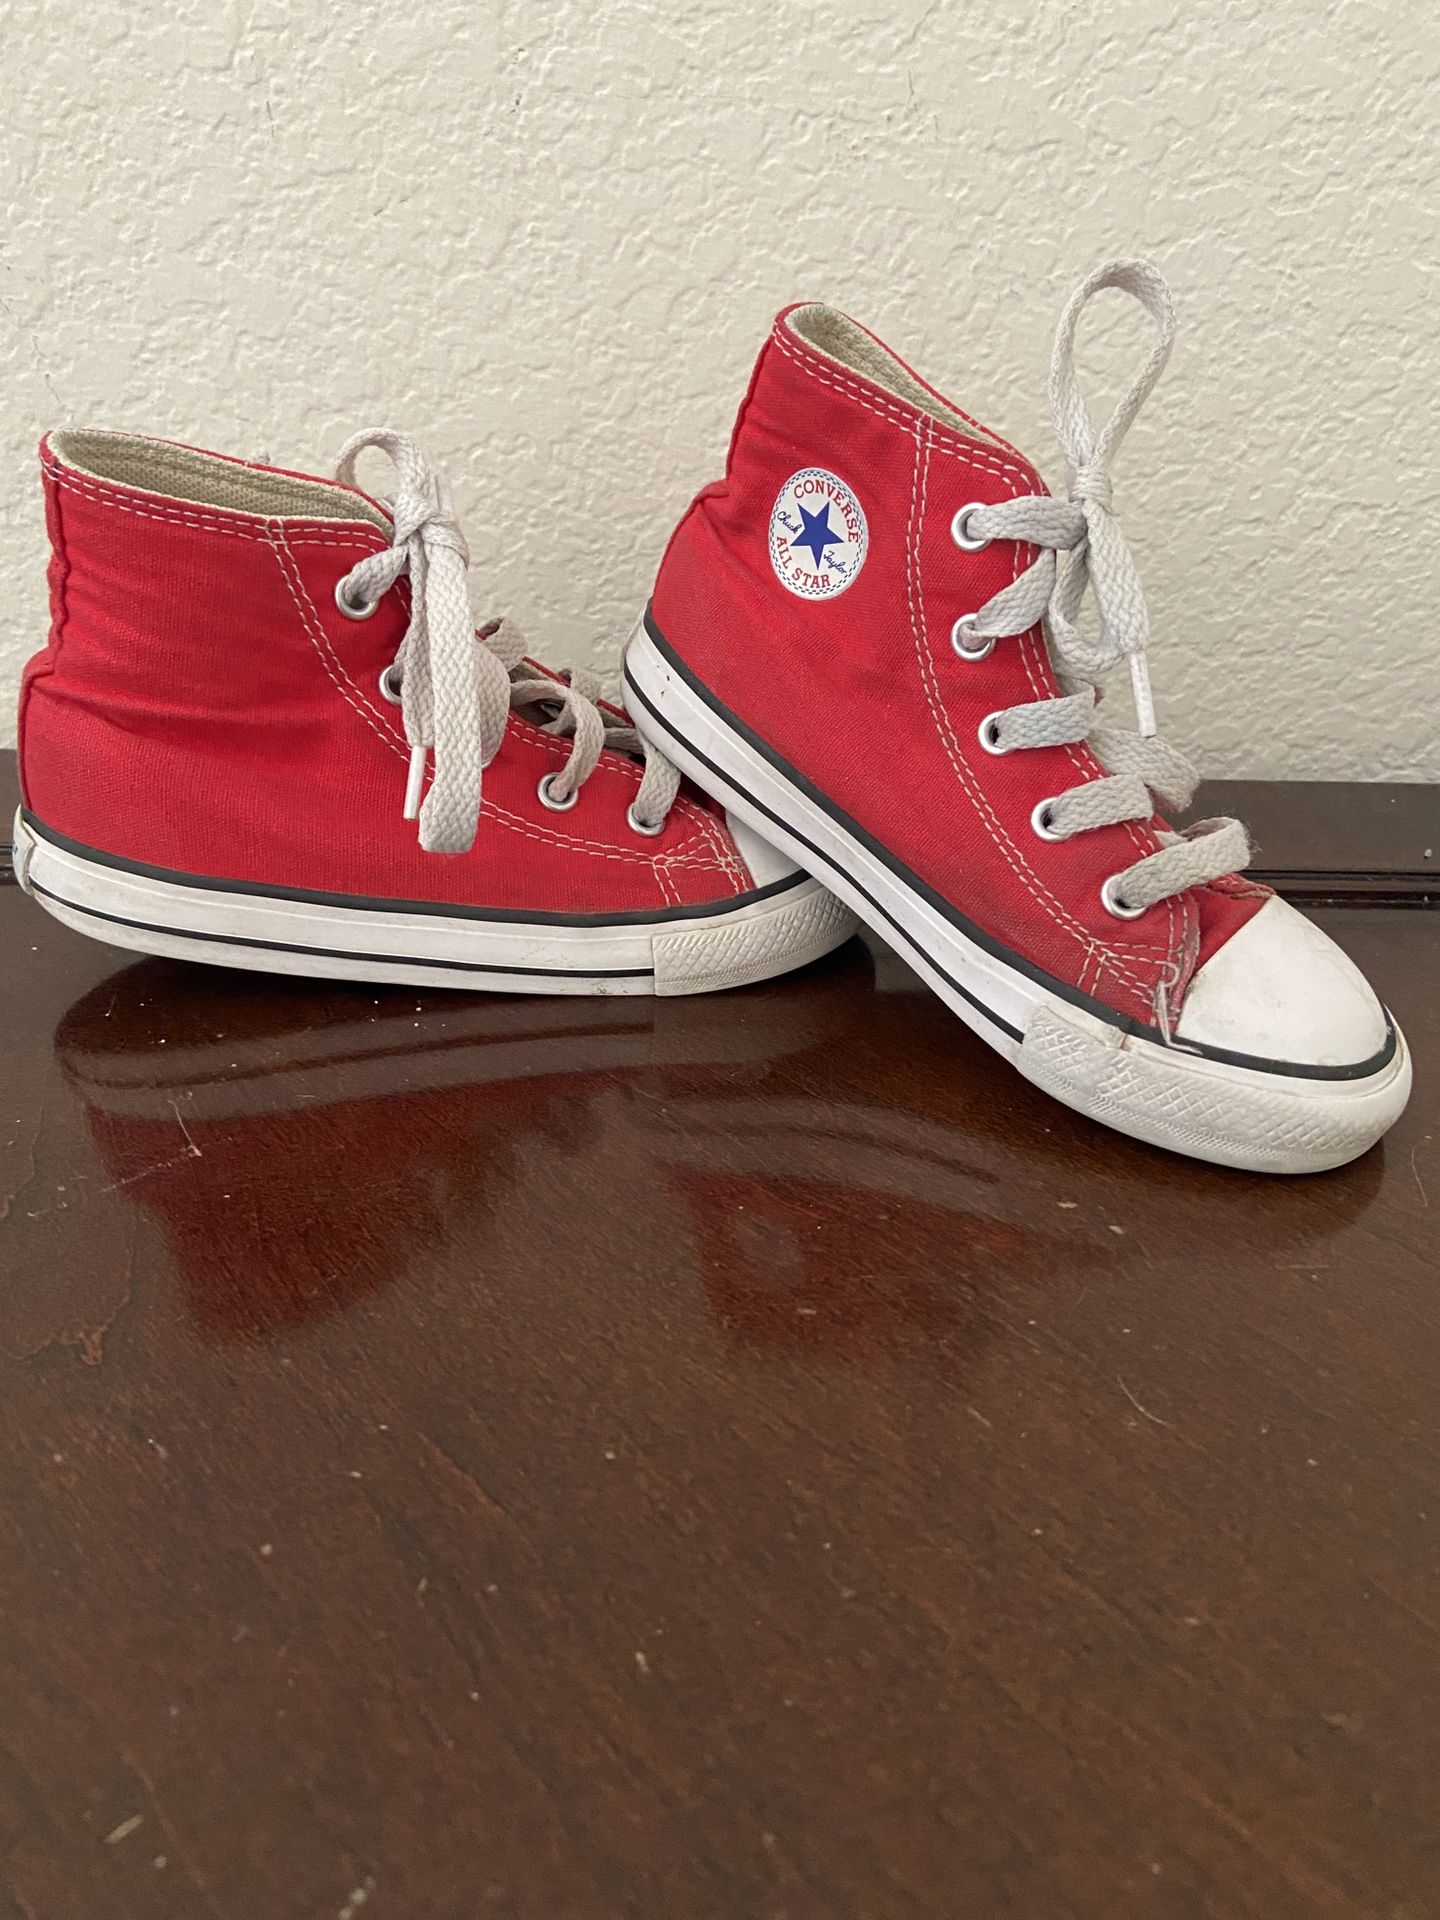 Converse High Top Sneakers 9c